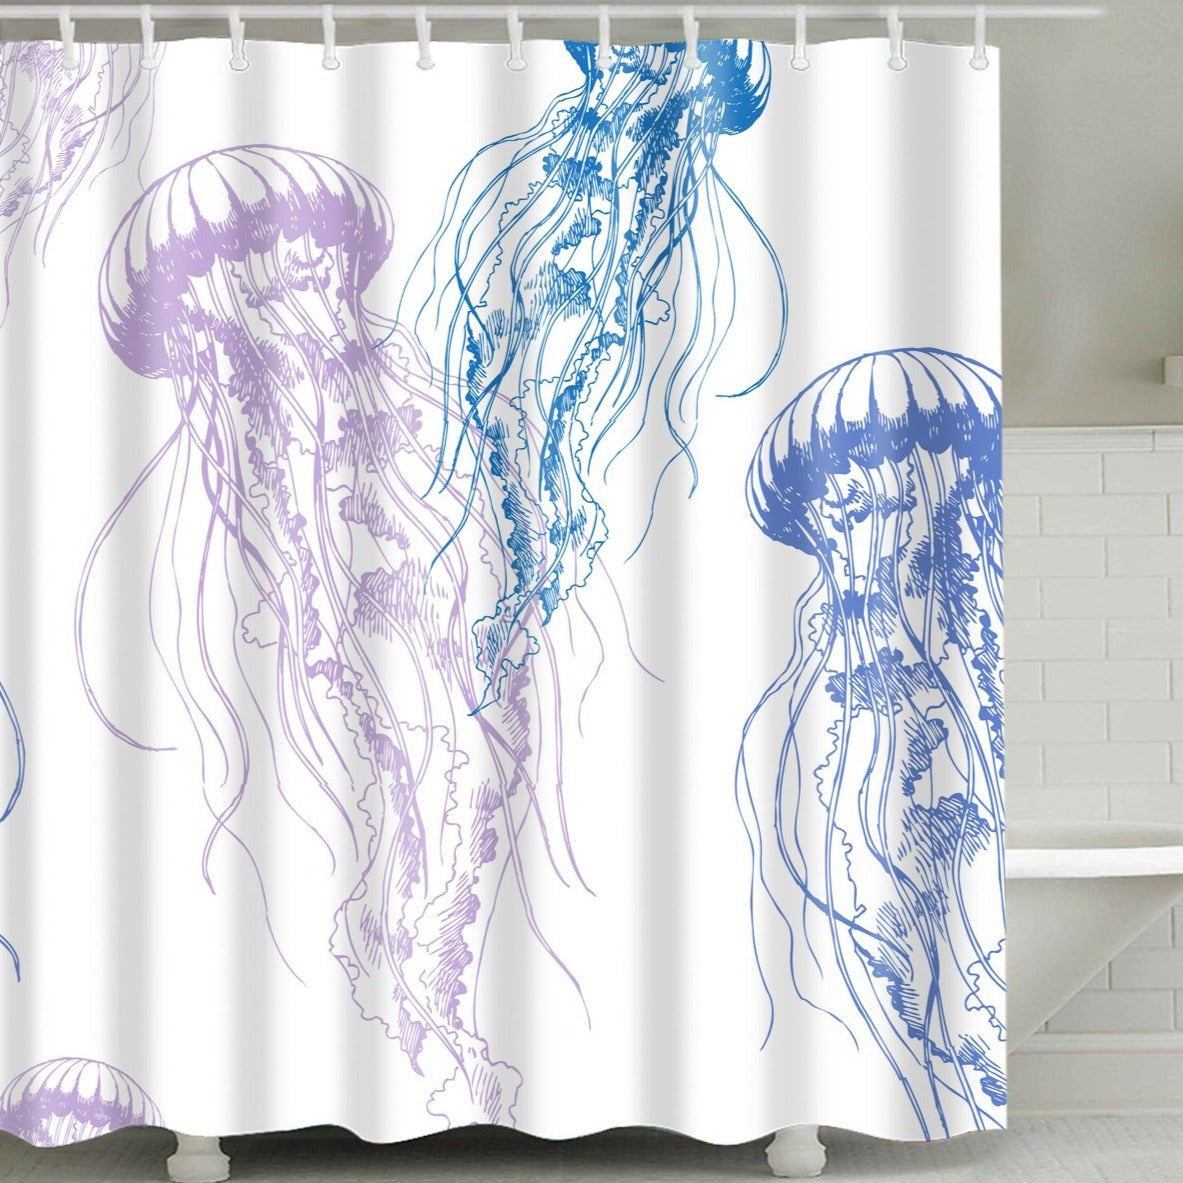 Colorful Sketch Floating Jellyfish Shower Curtain